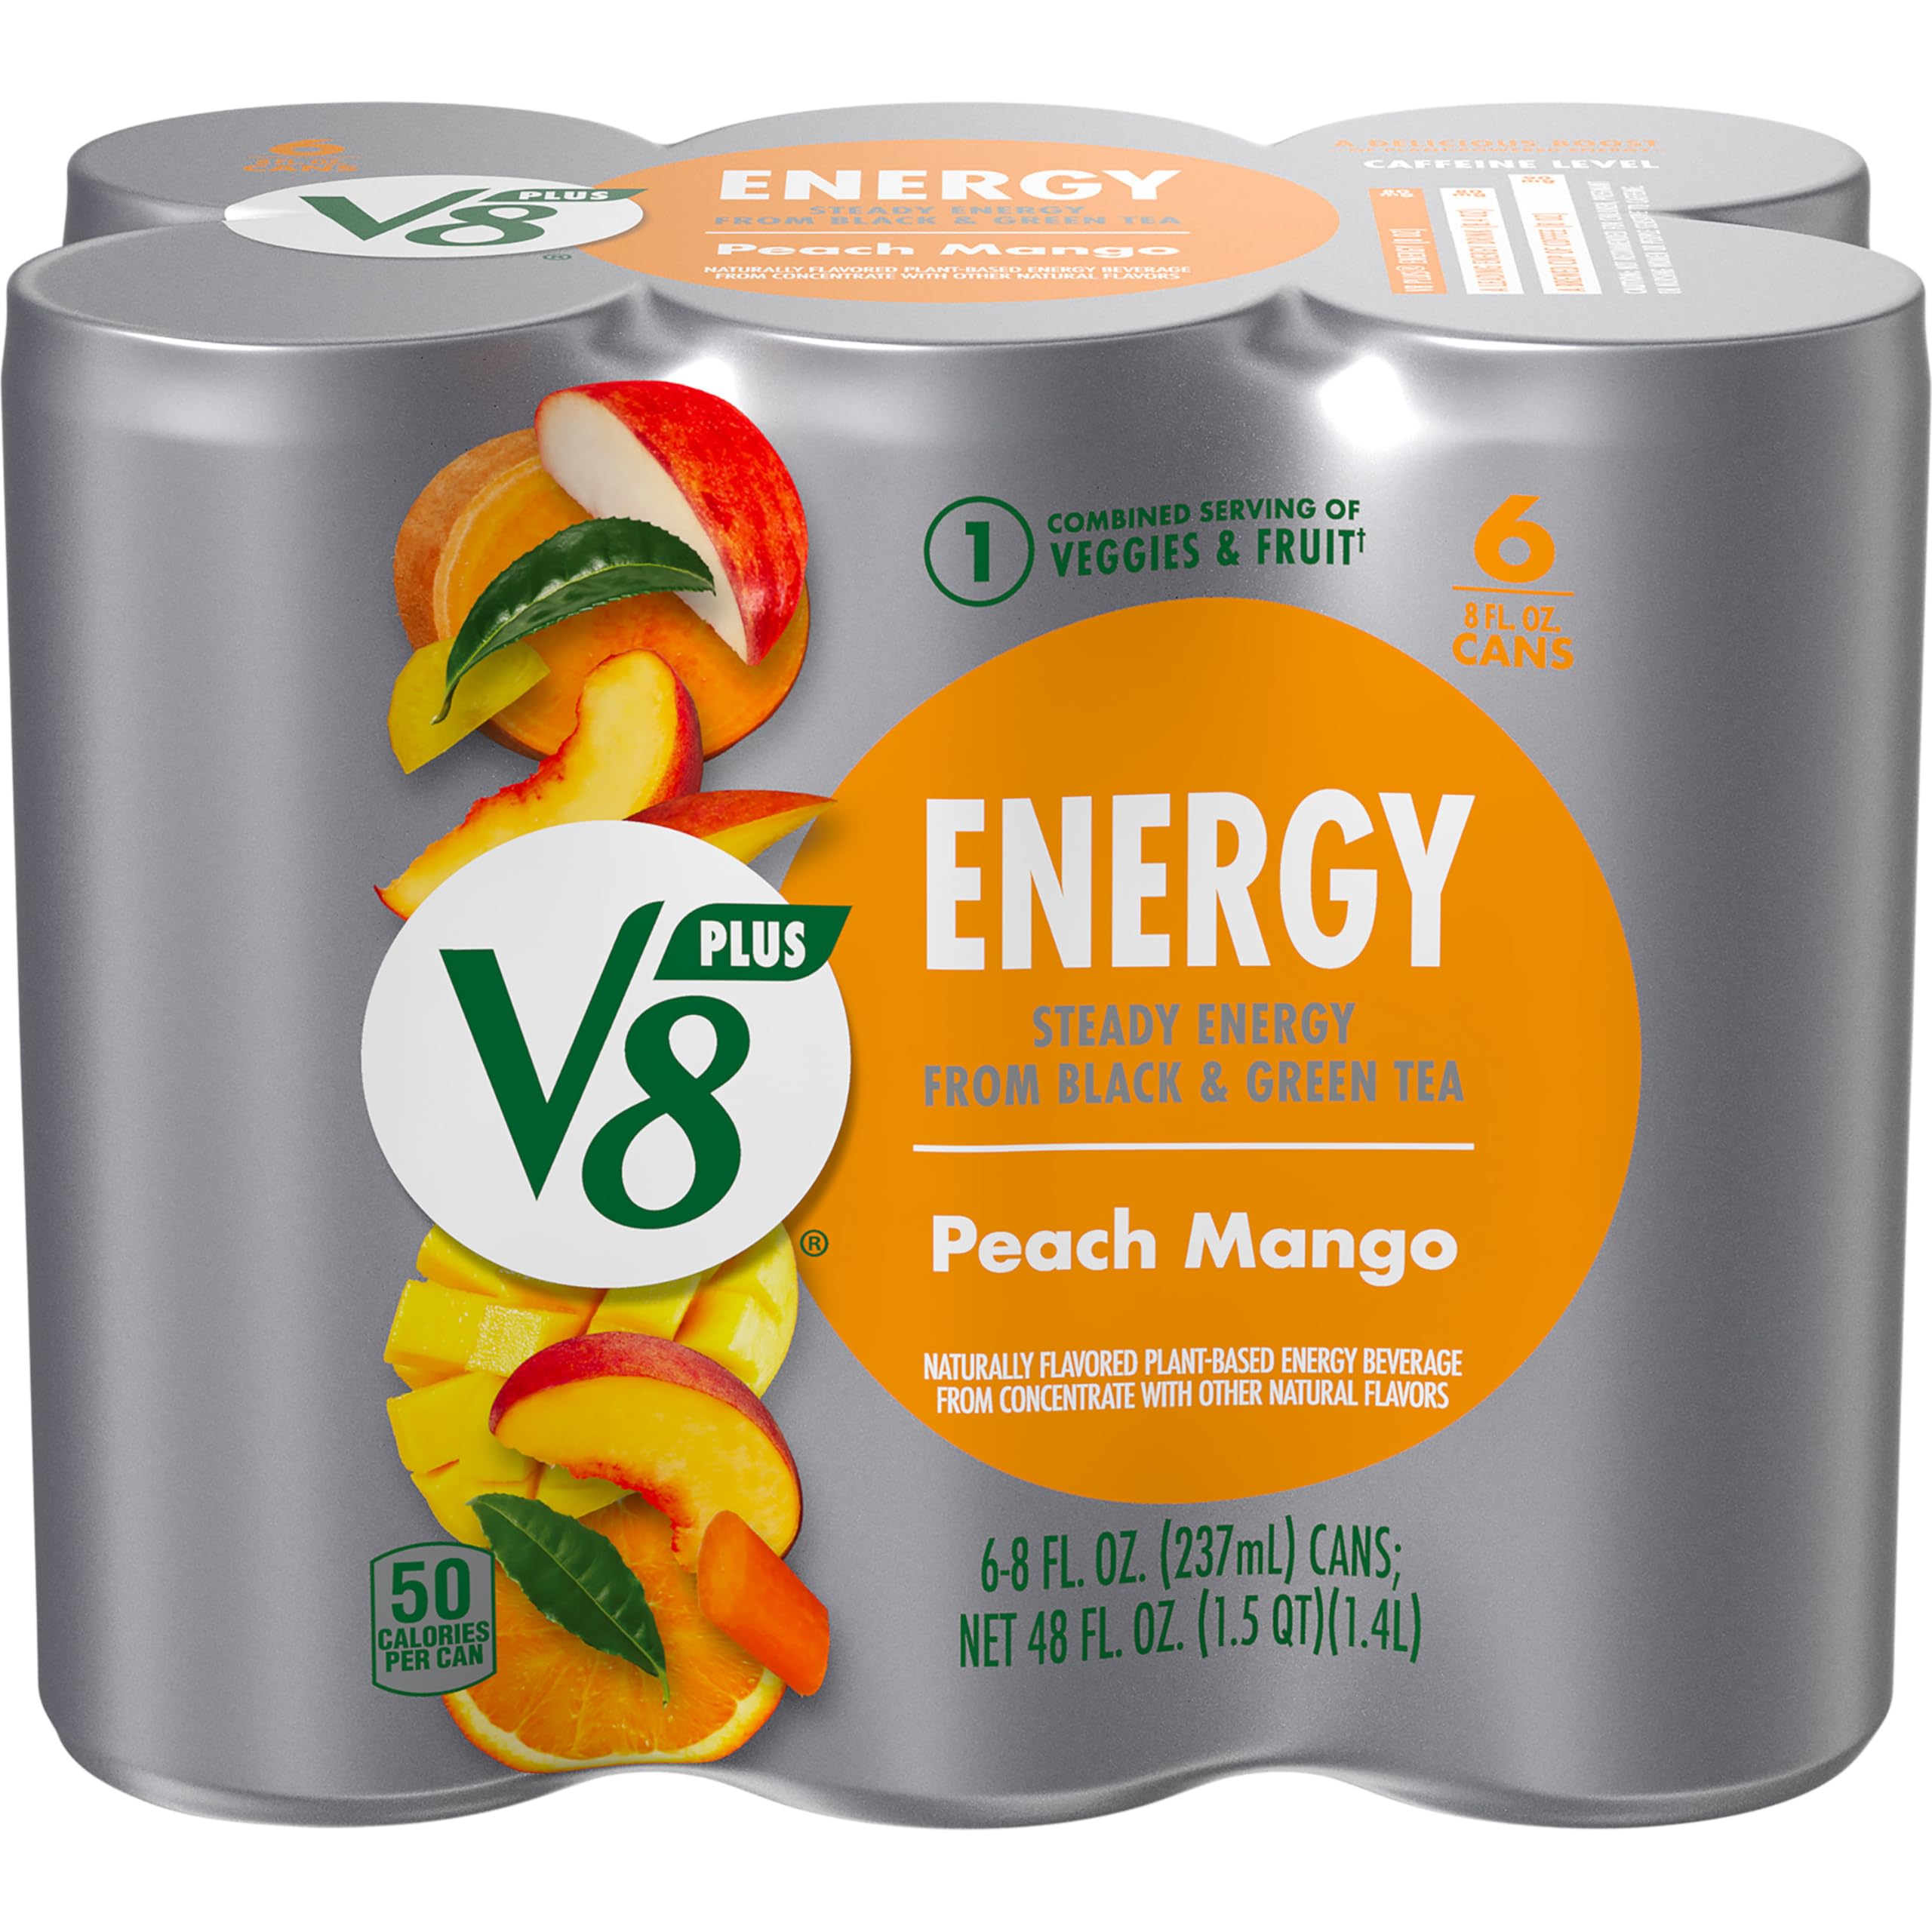 6-Pack 8-Oz V8 +ENERGY Energy Drinks (Peach Mango or Pomegranate Blueberry) $3.68 + Free Shipping w/ Prime or on $35+